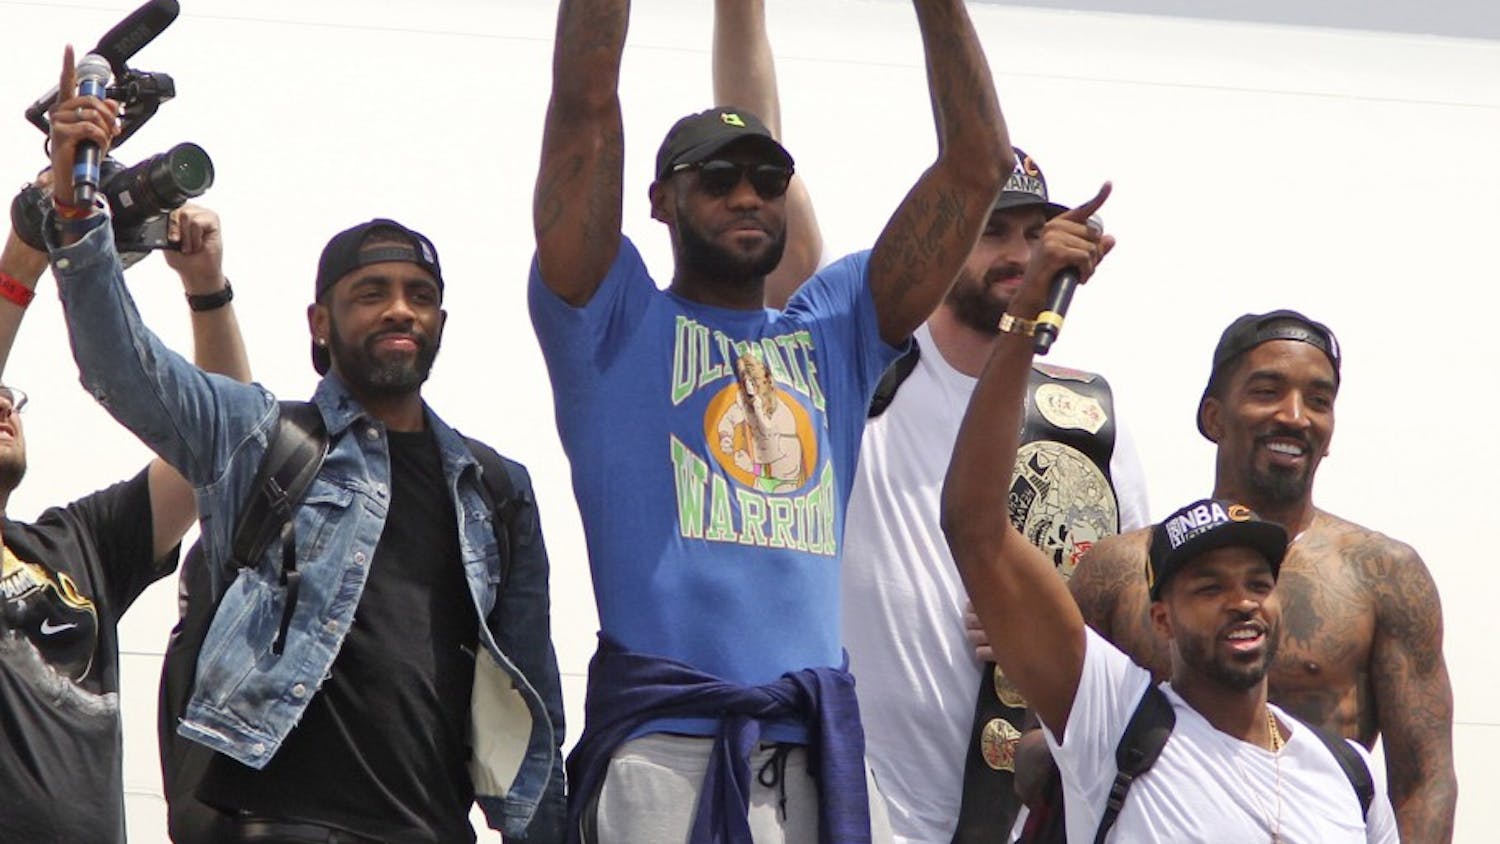 Cleveland Cavaliers' LeBron James holds up the NBA Championship trophy alongside teammates on JUne 20, 2016 after arriving in Cleveland, Ohio. Joining James are Kyrie Irving, left, Kevin Love, J.R. Smith and Tristan Thompson as they arrive at Atlantic Aviation. (Mike Cardew/Akron Beacon Journal/TNS )